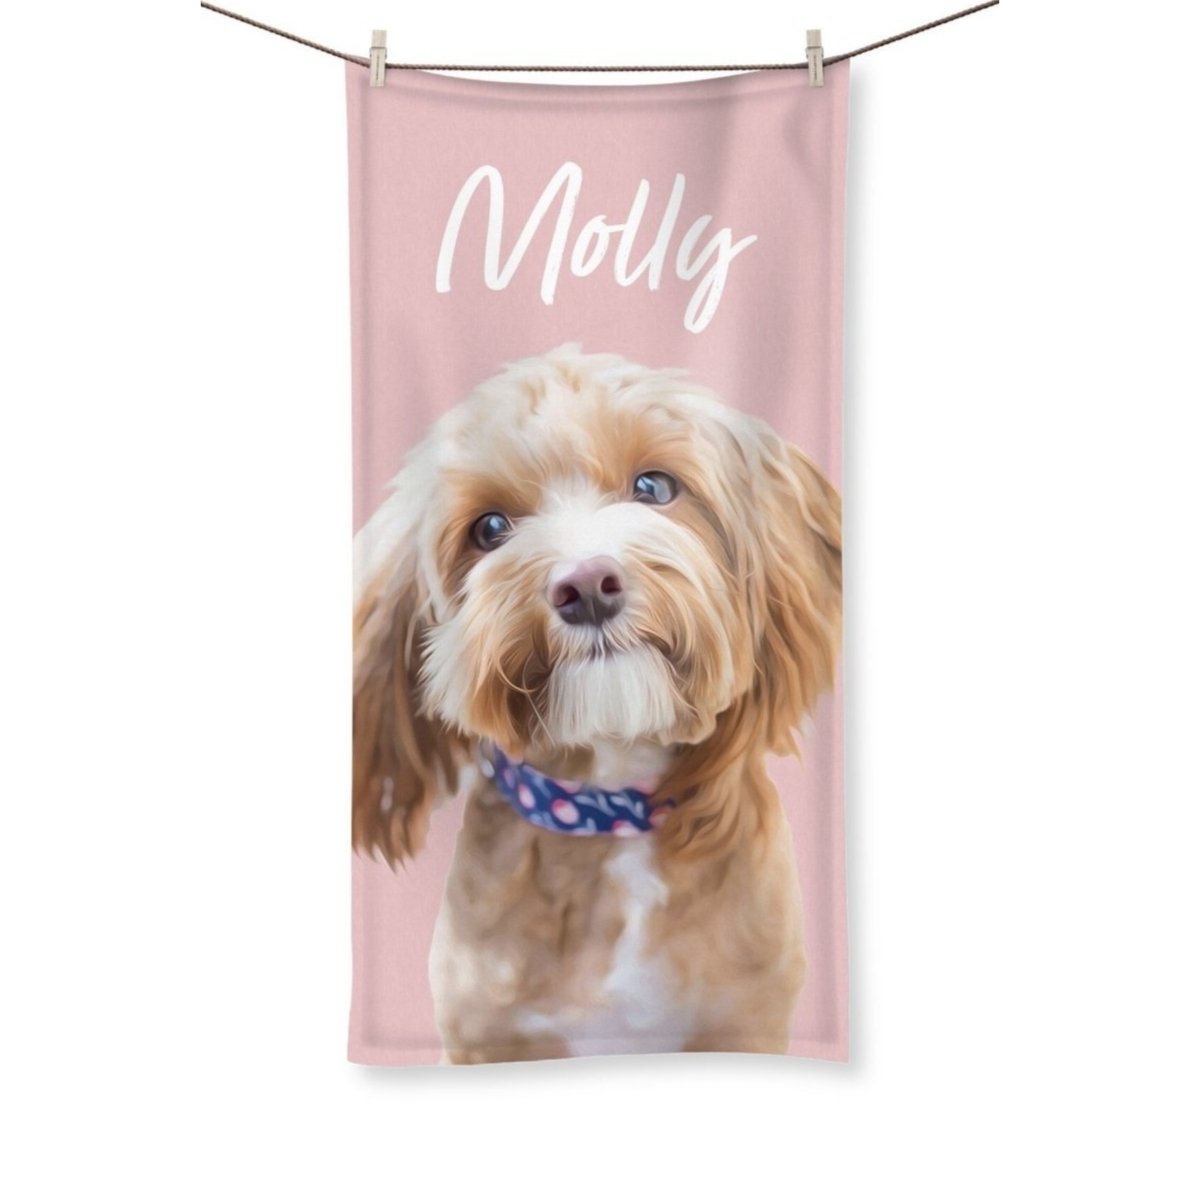 Minimalist: Custom Pet Towel - Paw & Glory - #pet portraits# - #dog portraits# - #pet portraits uk#Paw & Glory, pawandglory, dog portrait images, louvenir pet portrait, painting of your dog, in home pet photography, the general portrait, custom pet painting, pet portrait,pet portraits Towel